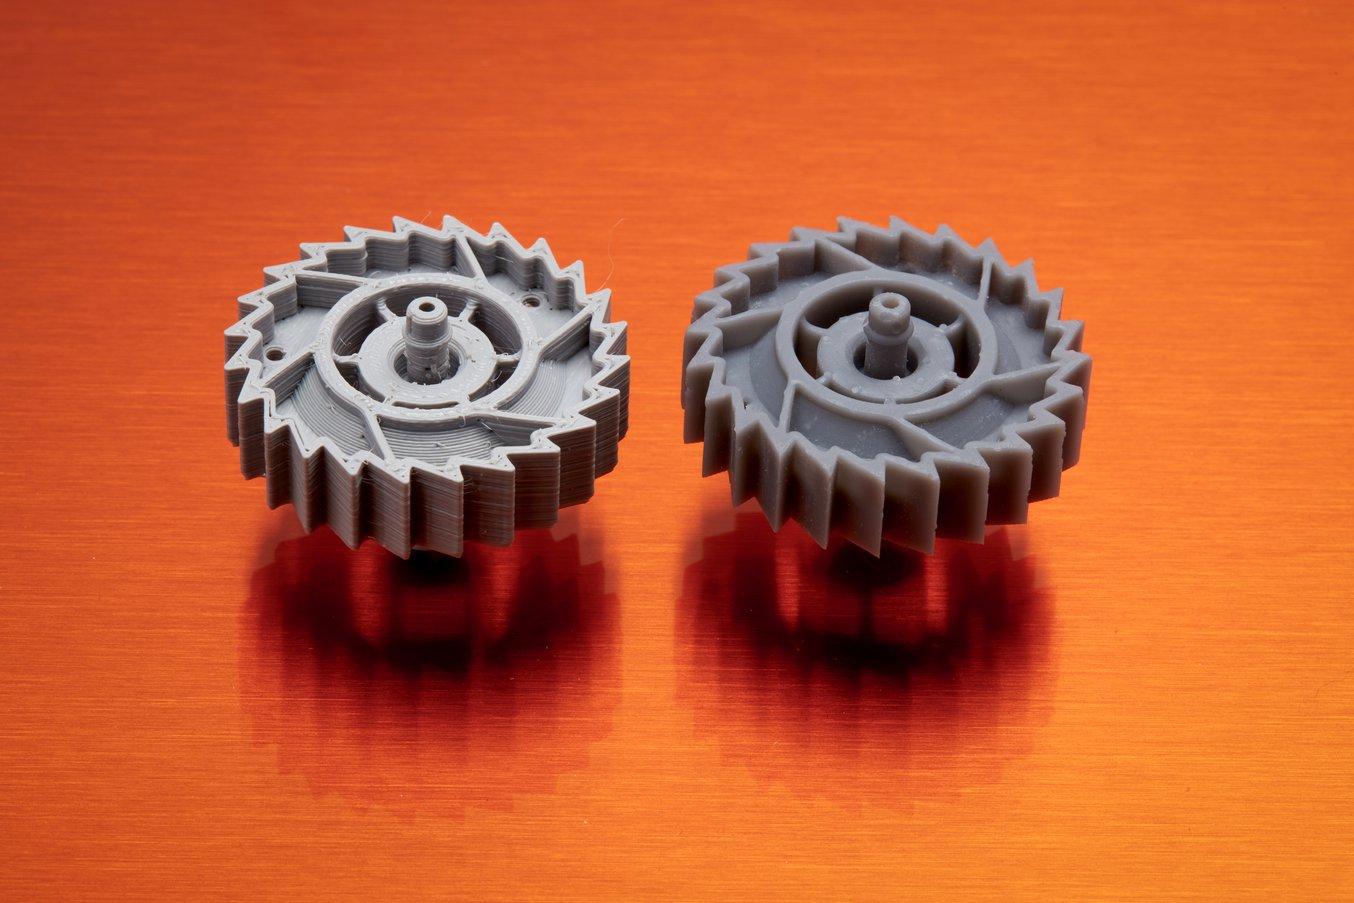 Thanks to the highly precise laser, SLA 3D printers are better for manufacturing complex parts (FDM part on the left, SLA part on the right).